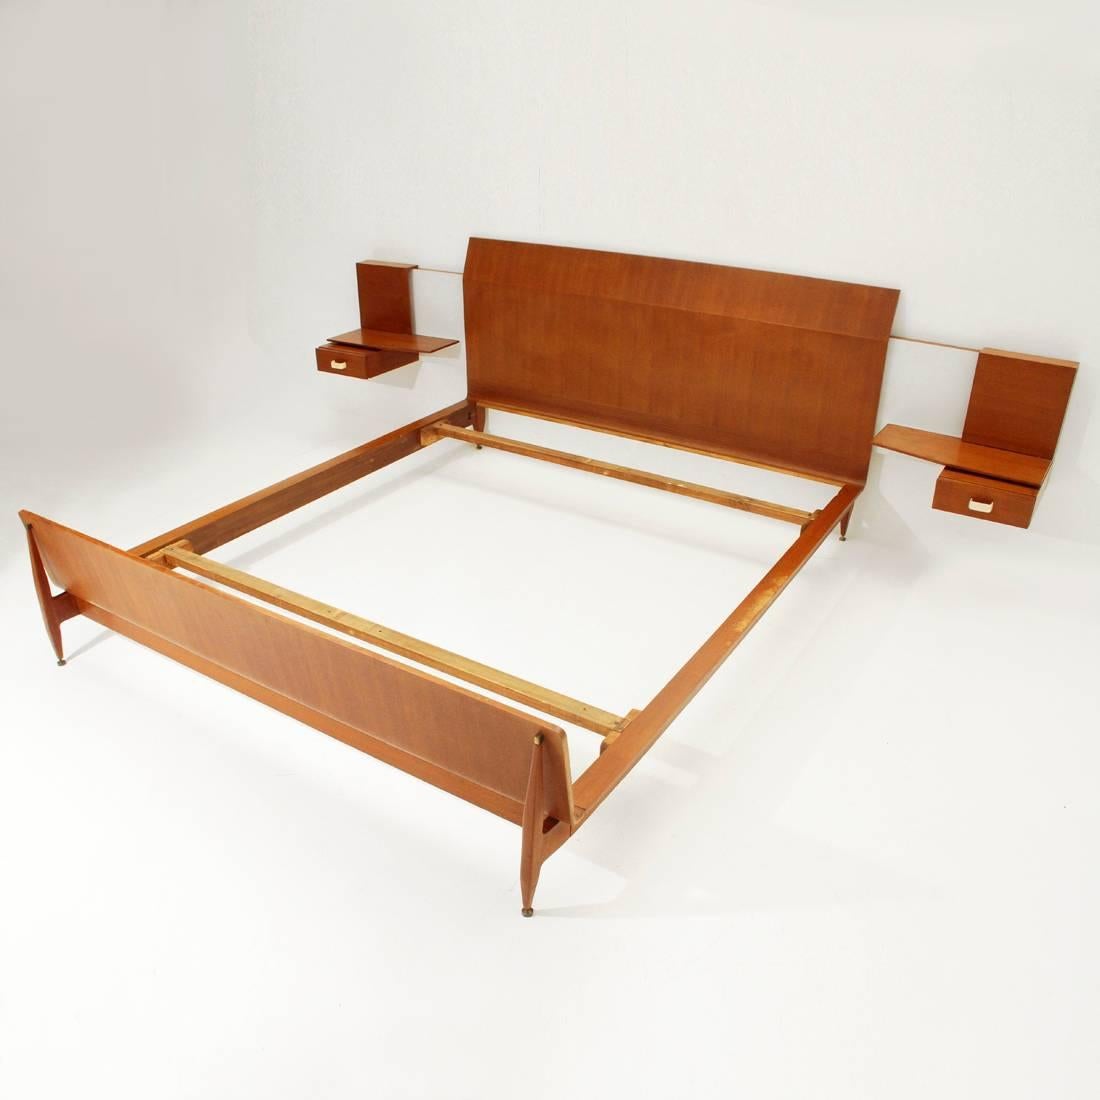 Mid-Century Modern Modernist Bed with Nightstand in Teak by Galleria Mobili d'Arte of Cantù, 1950s